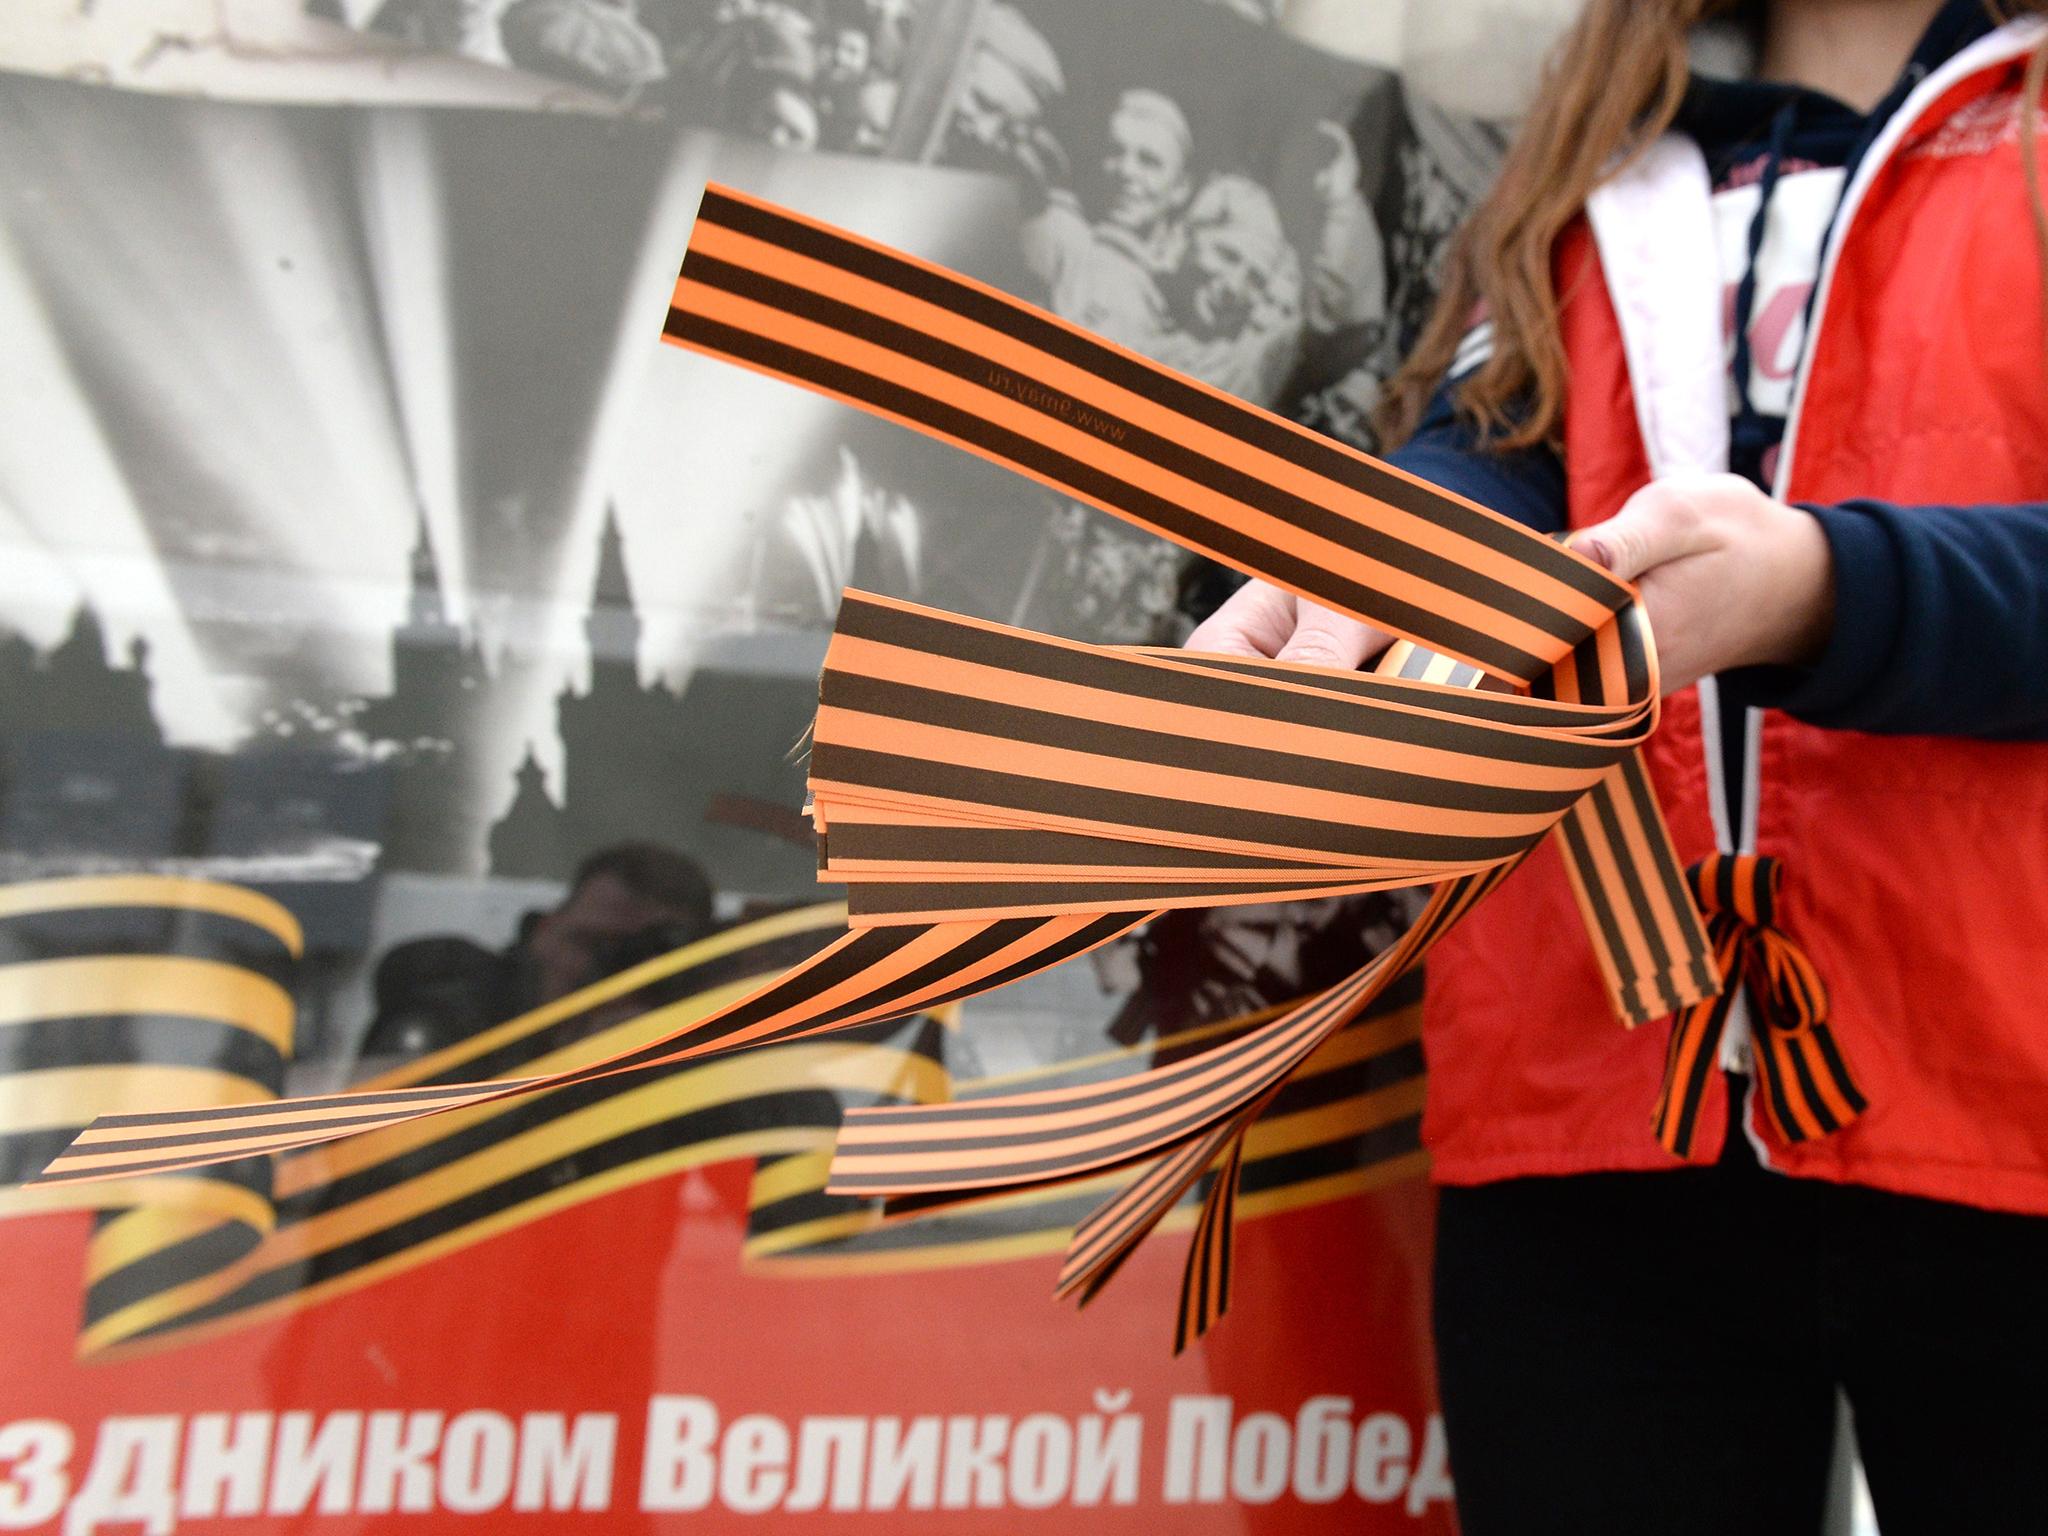 Volunteers handed out so-called St George's ribbons in Moscow